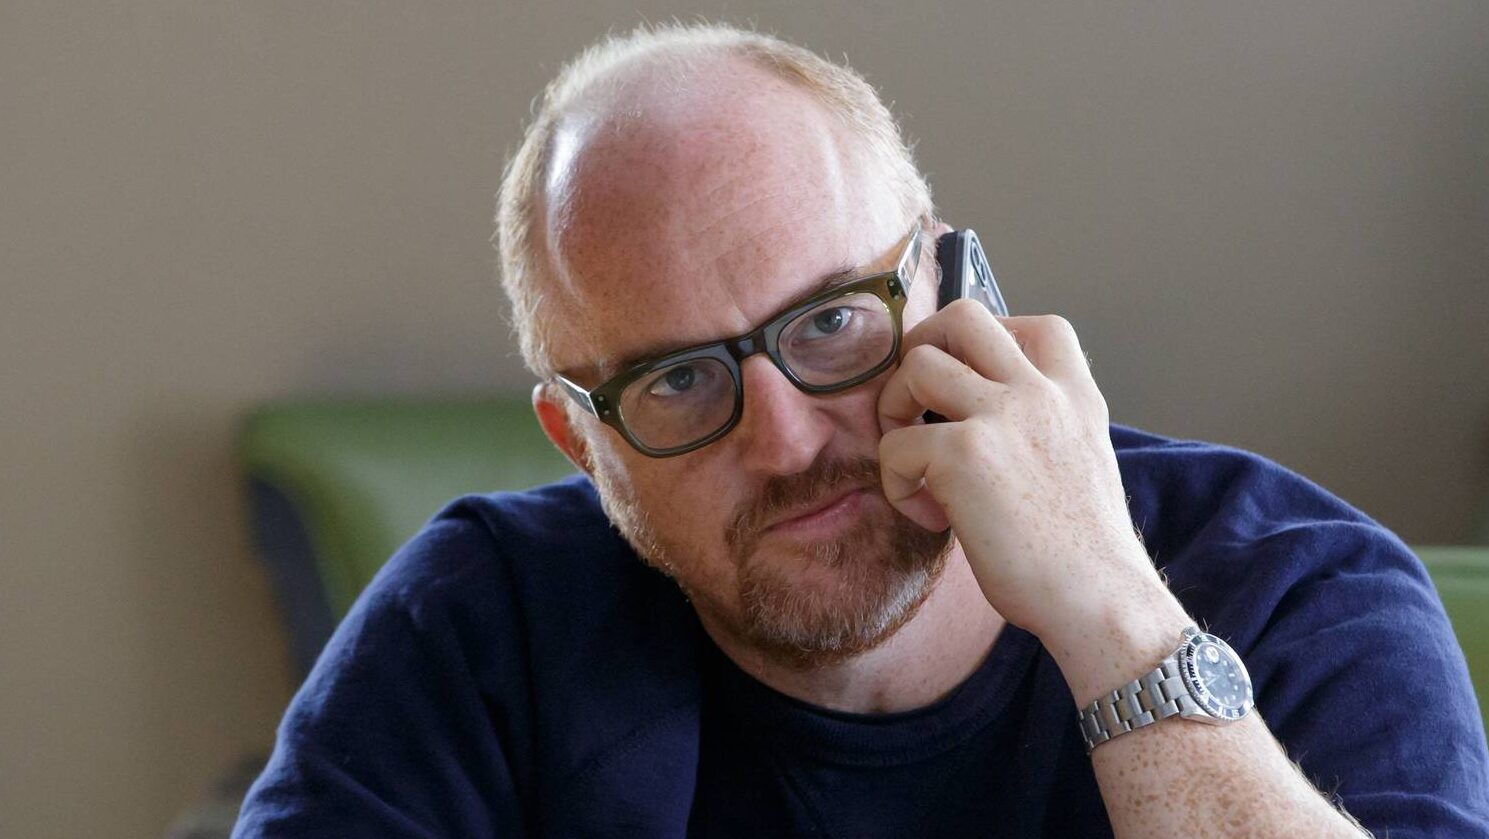 Louis C.K. 'Sorry/Not Sorry' Doc Review: Where Are the Male Comedians?